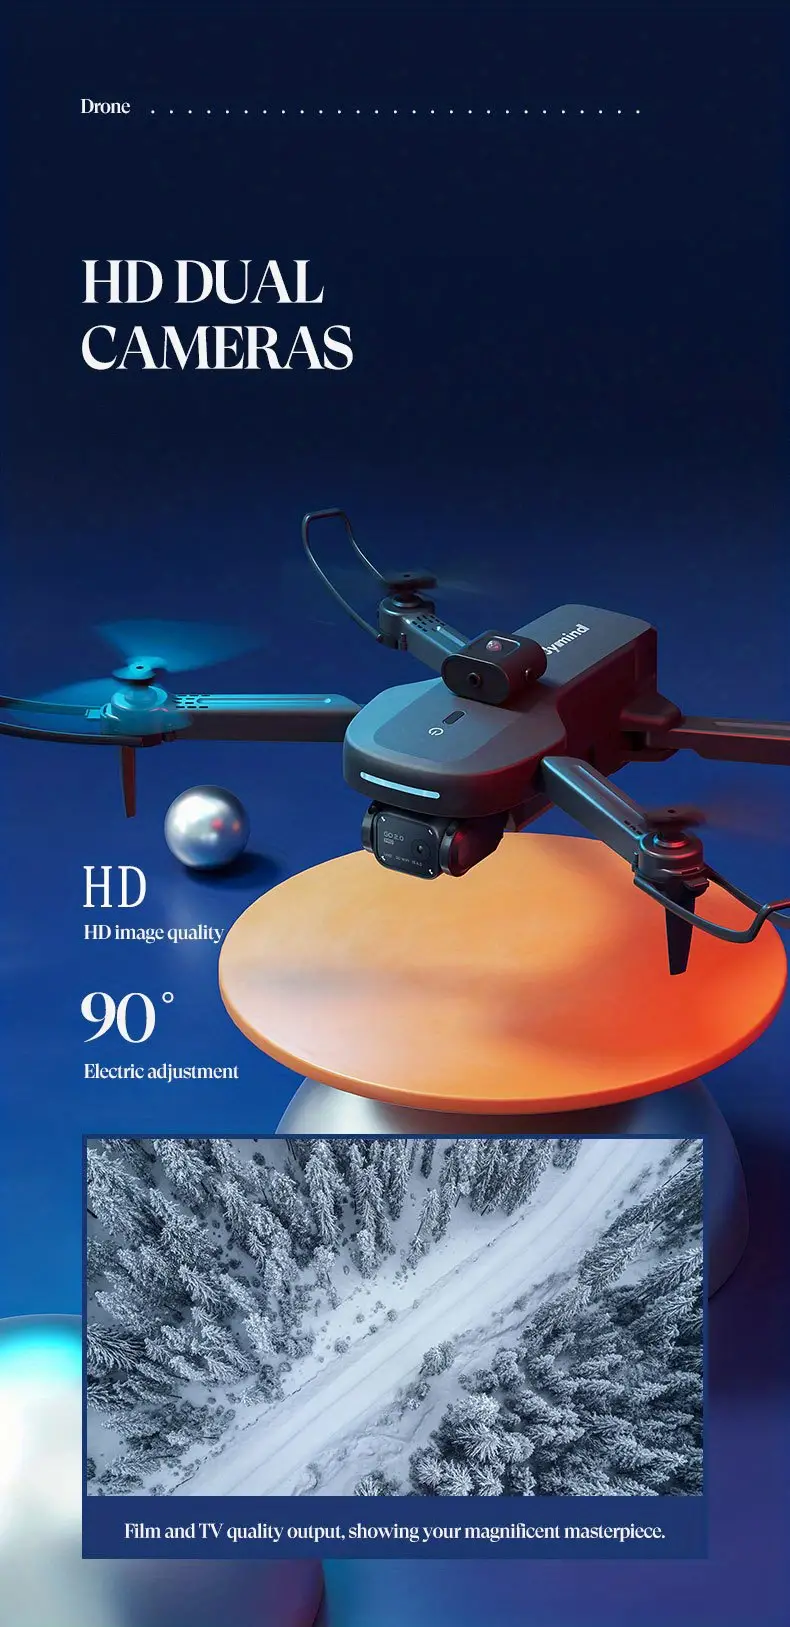 drone with obstacle avoidance eic camera headless mode optical flow positioning one key return smart follow headless mode 5g real time image transmission gesture photography details 2